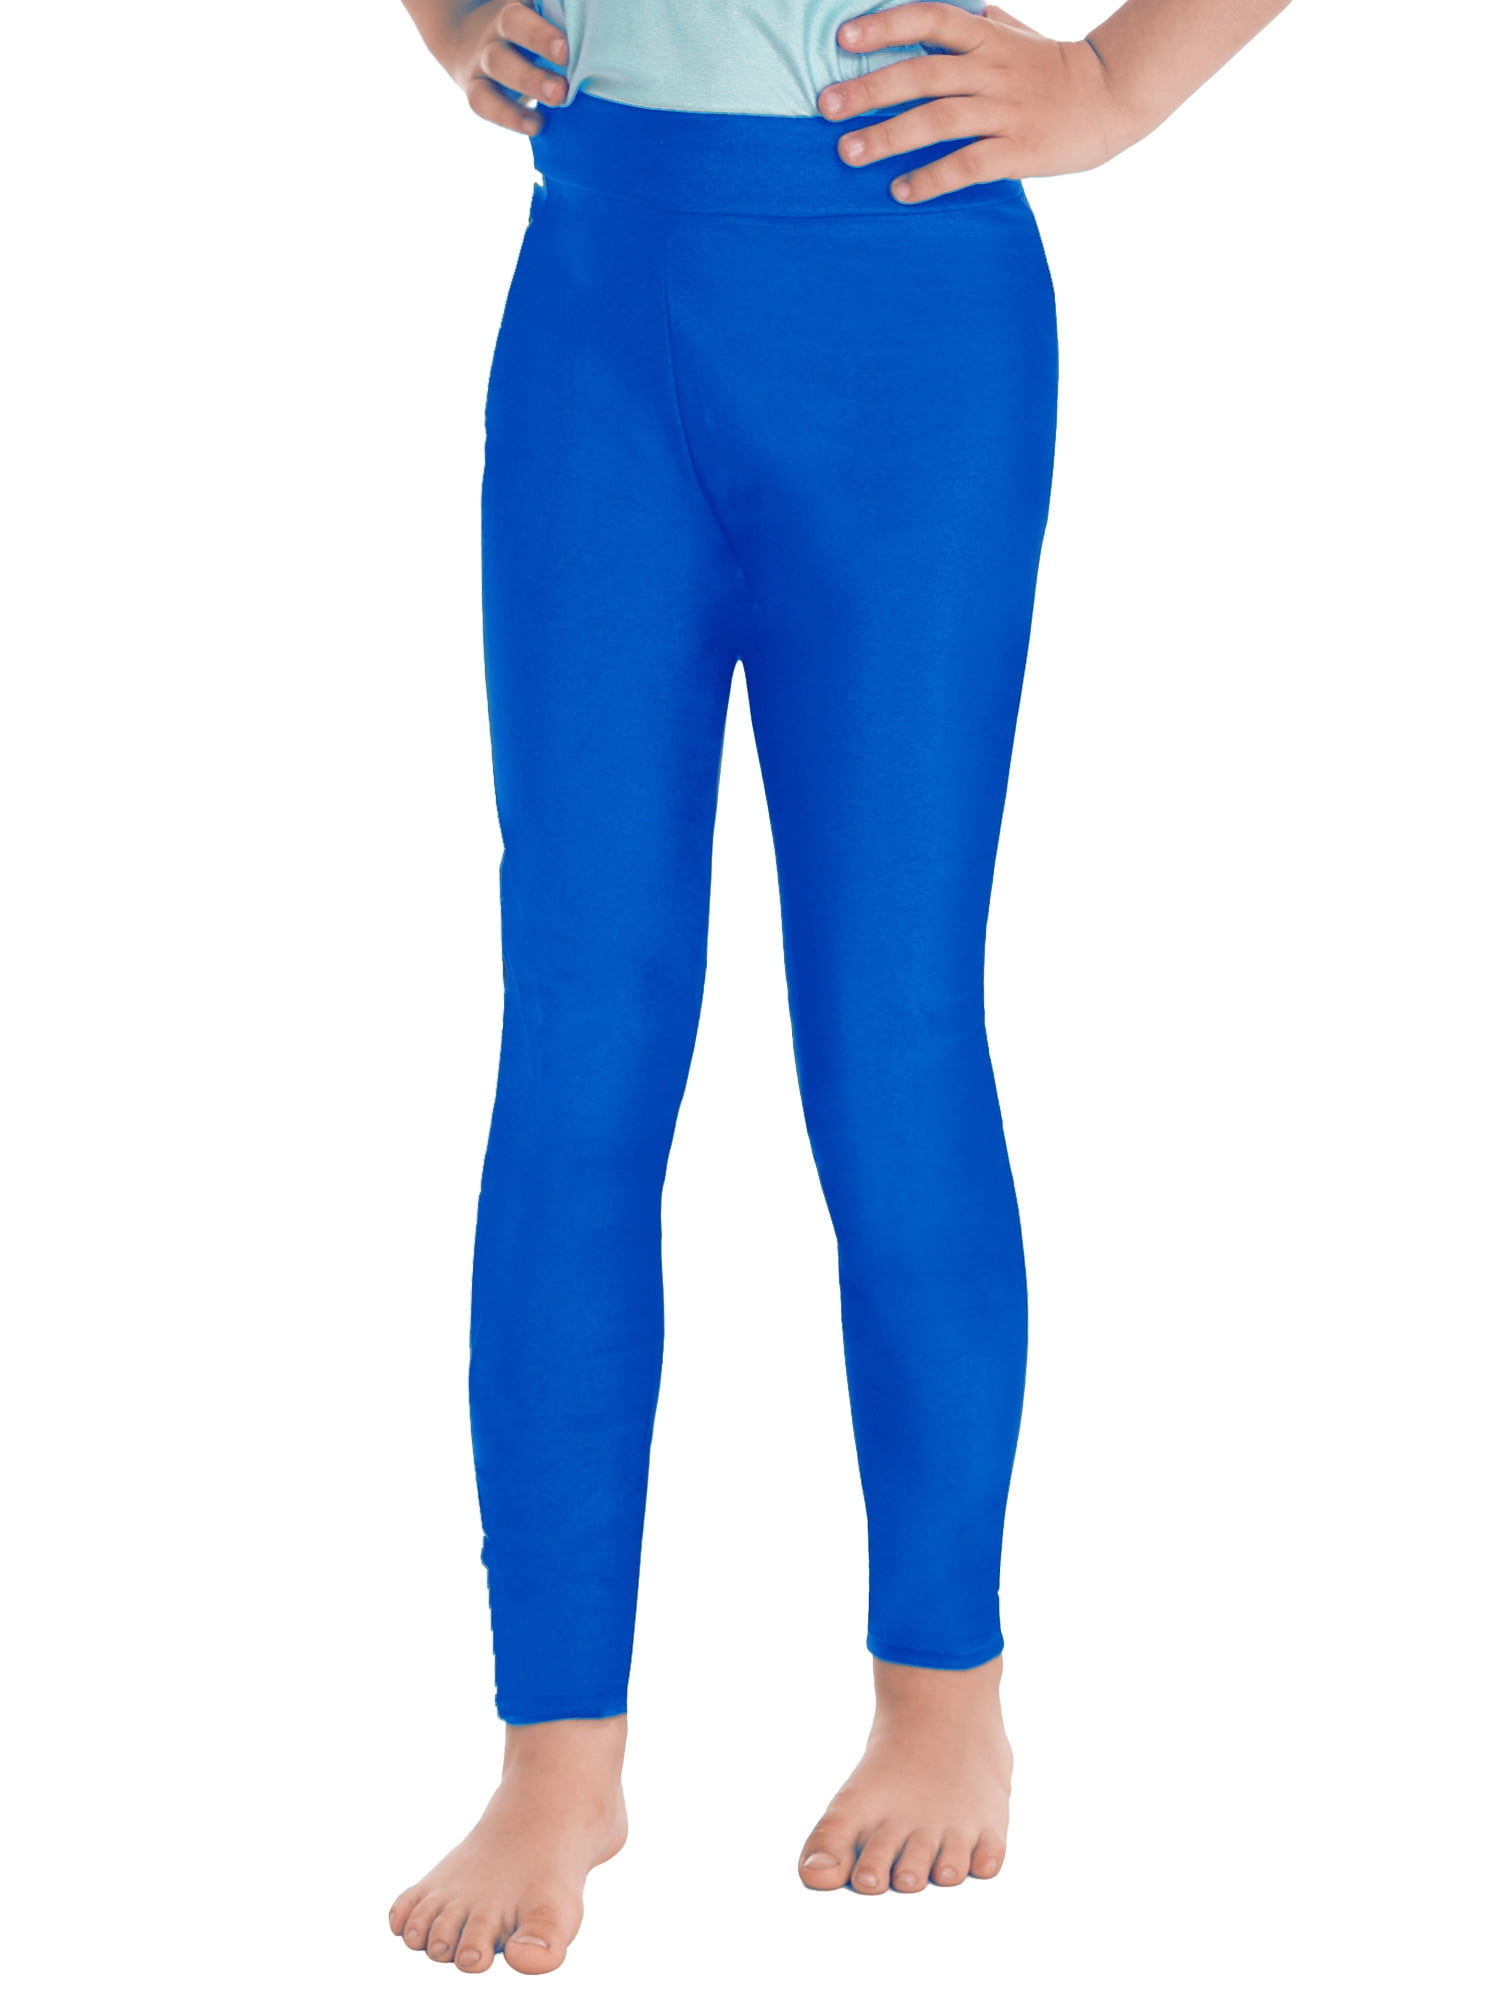 DPOIS Girls' Compression Pants Yoga Tights Athletic Sports Leggings Royal  Blue 14